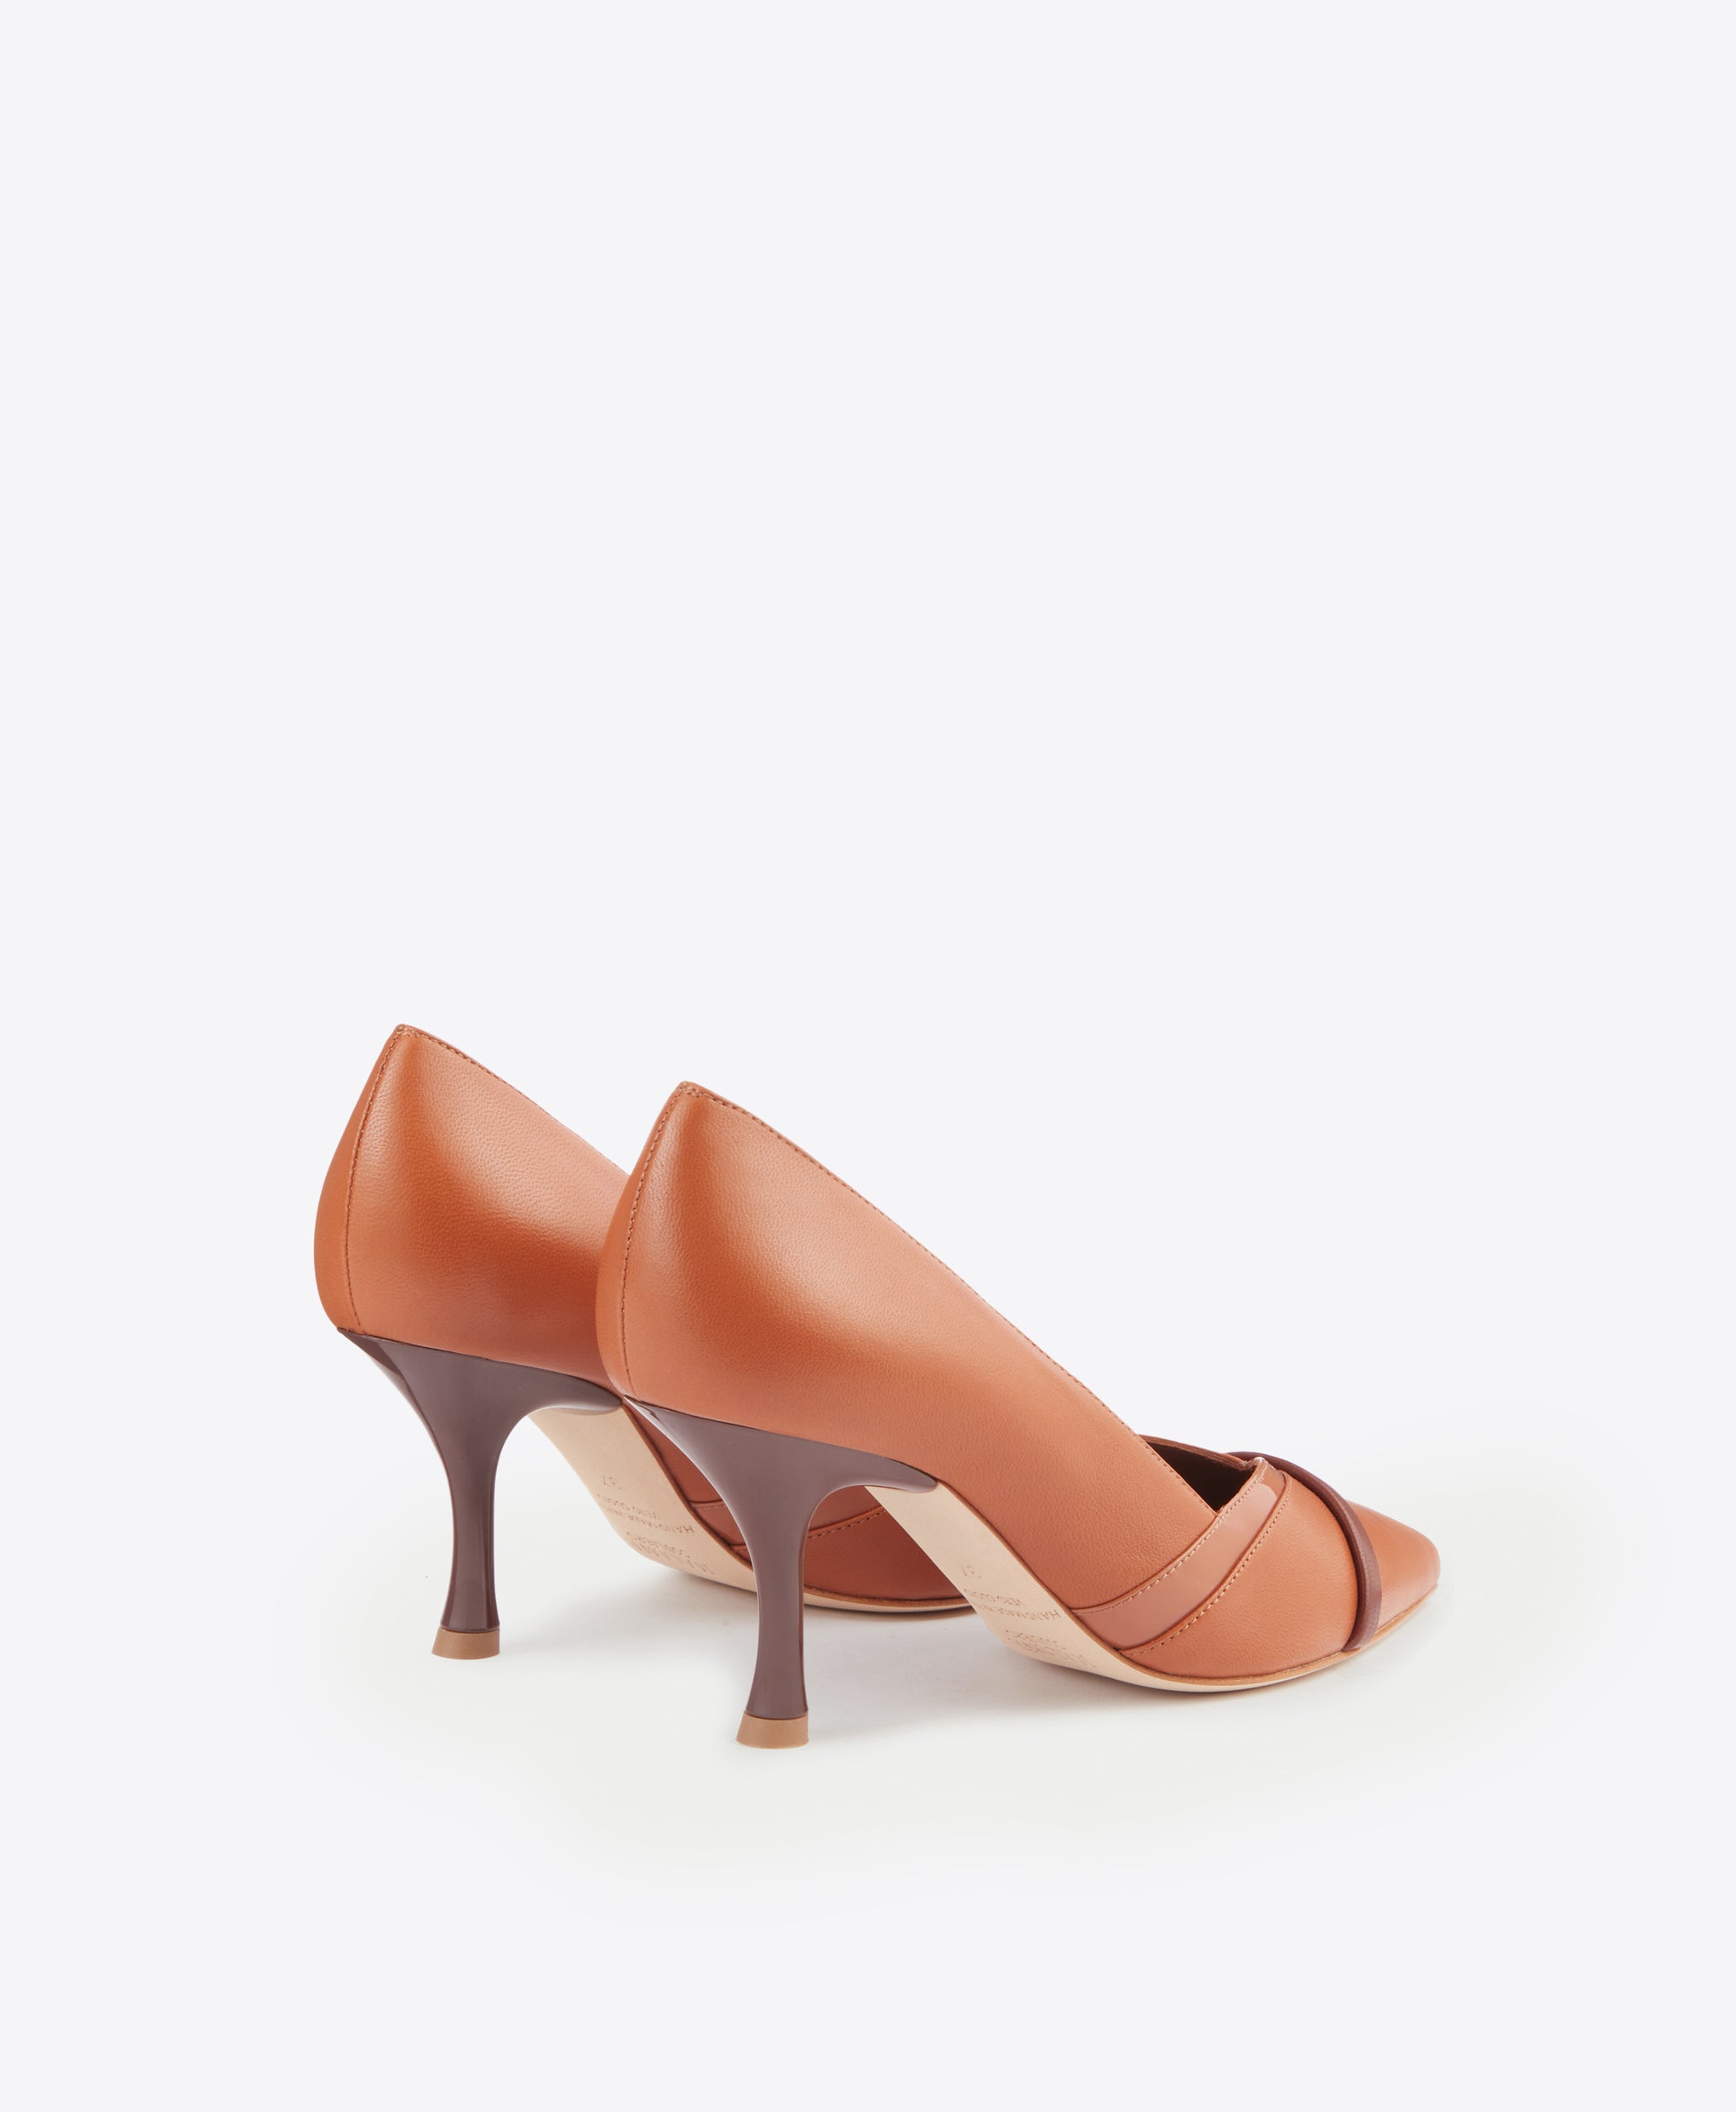 Women's Tan Leather Heeled Pumps Malone Souliers